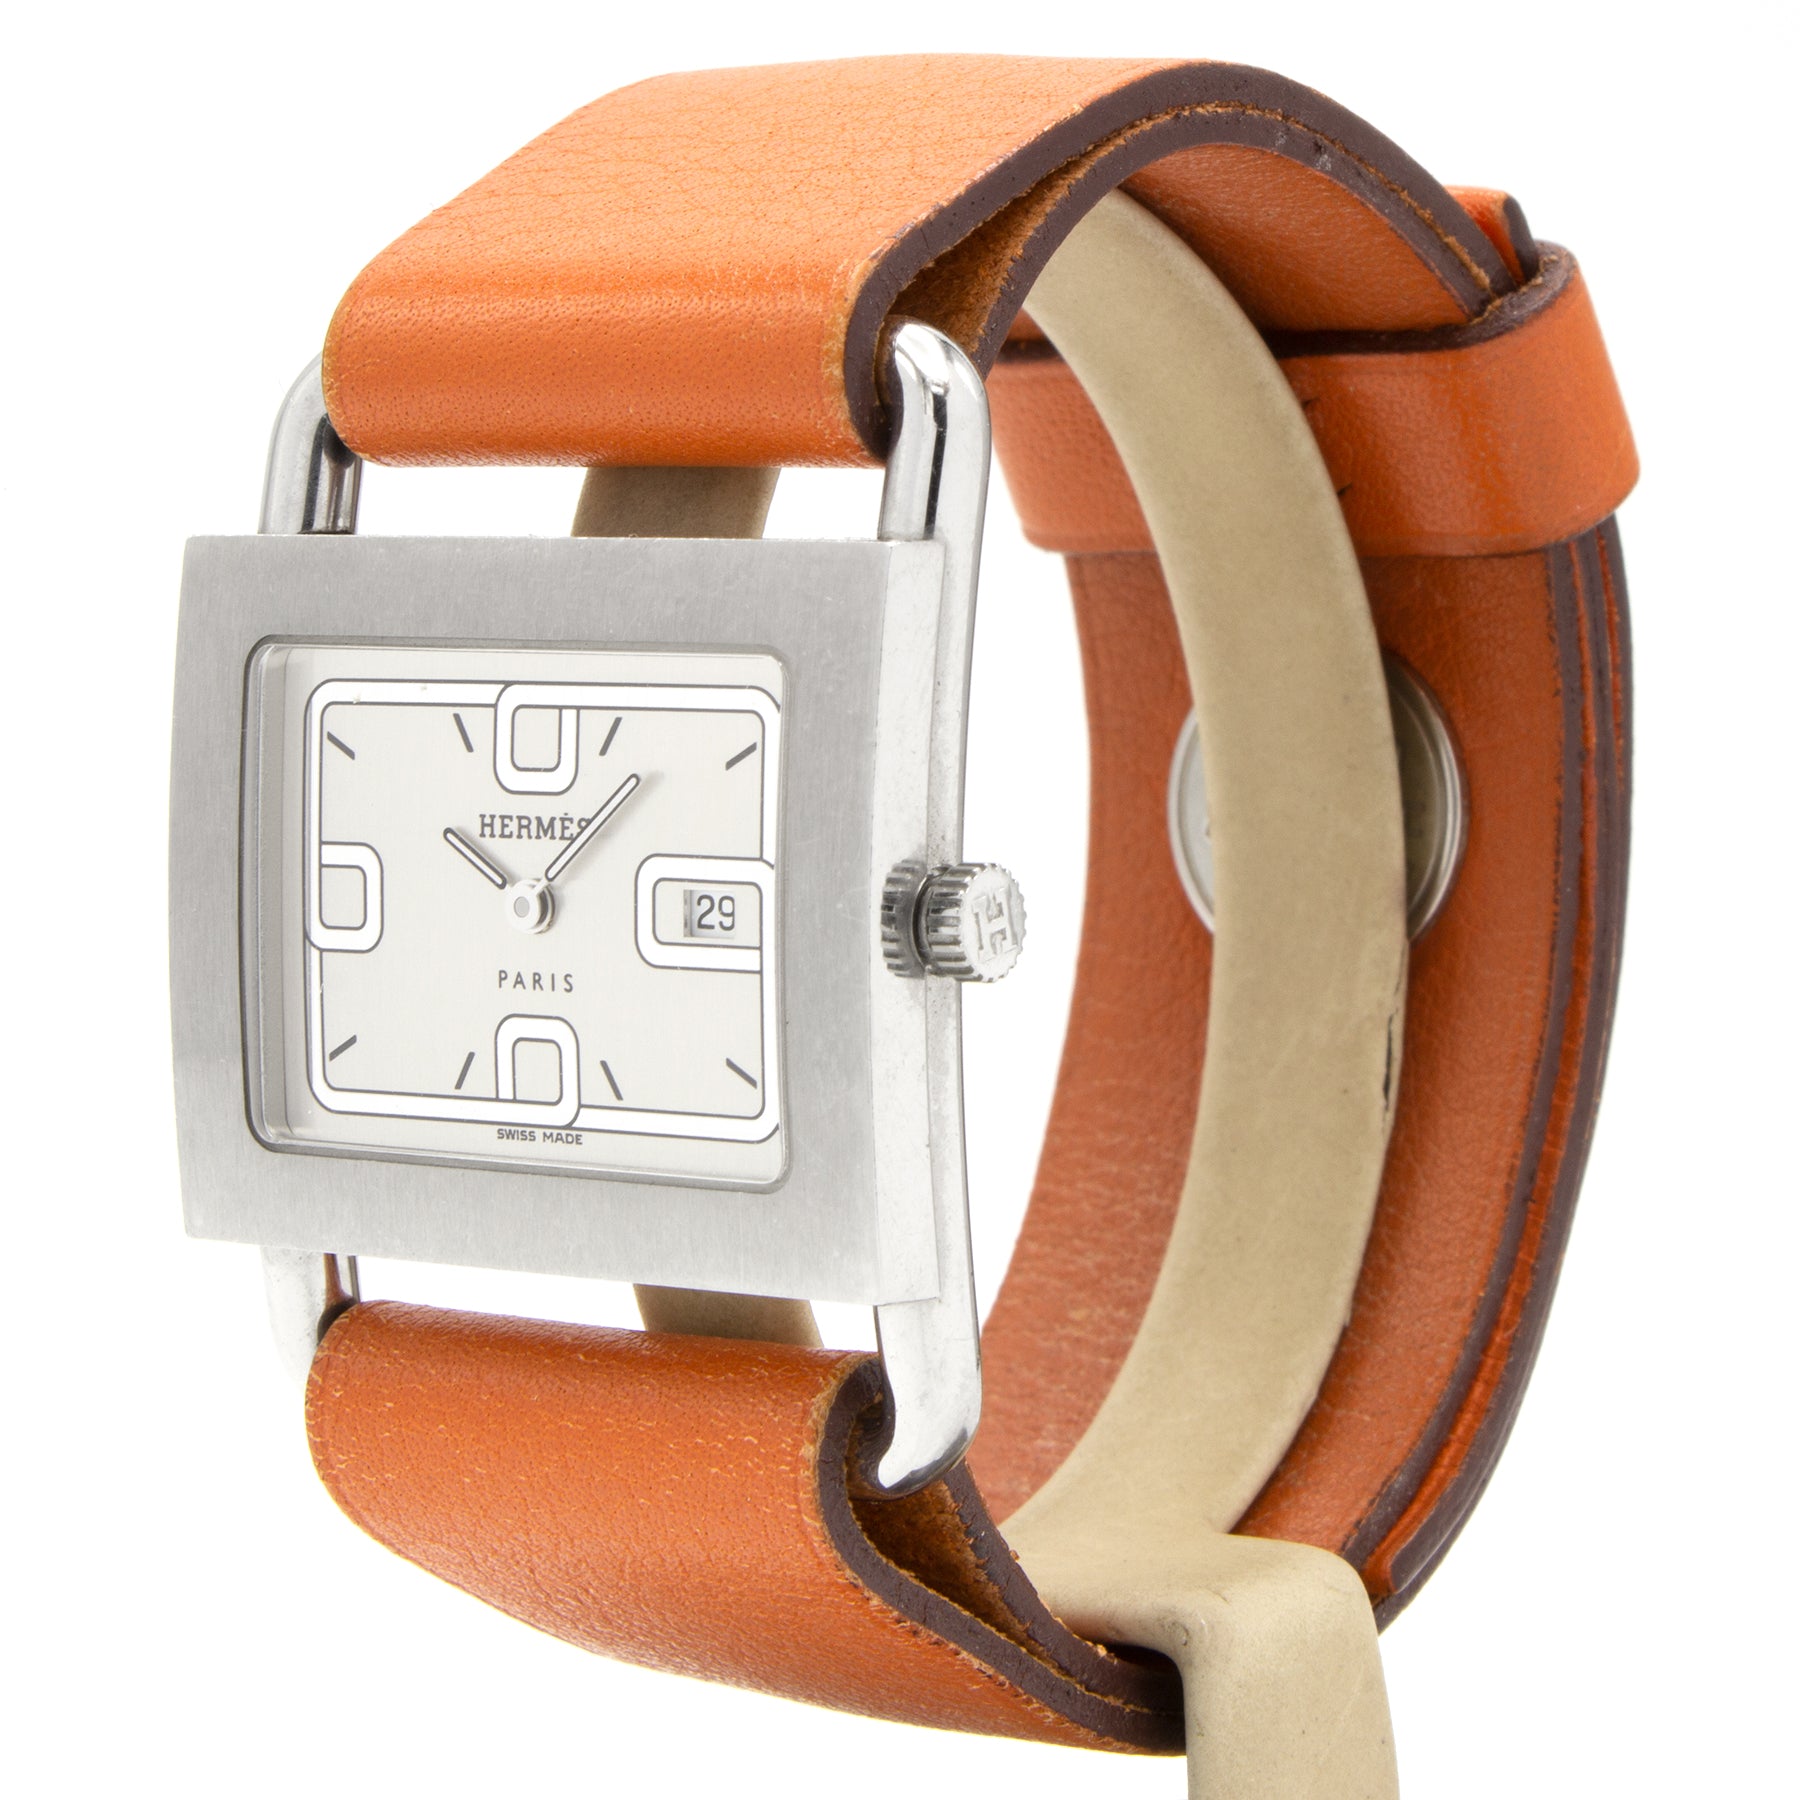 Hermès Barenia BA1.510 for £760 for sale from a Trusted Seller on